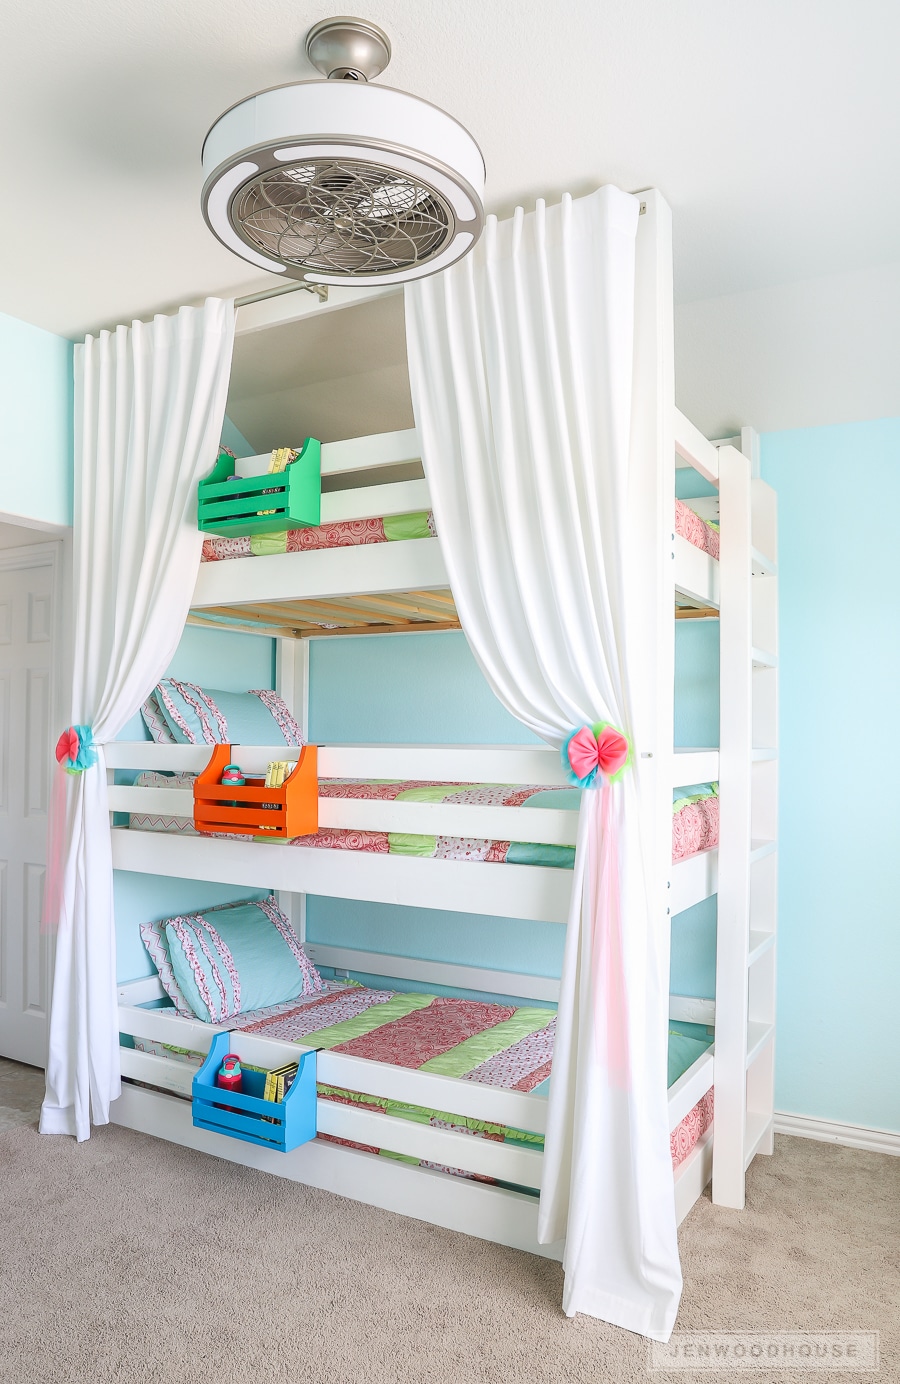 How To Build A Diy Triple Bunk Bed, Triple Stacked Bunk Beds